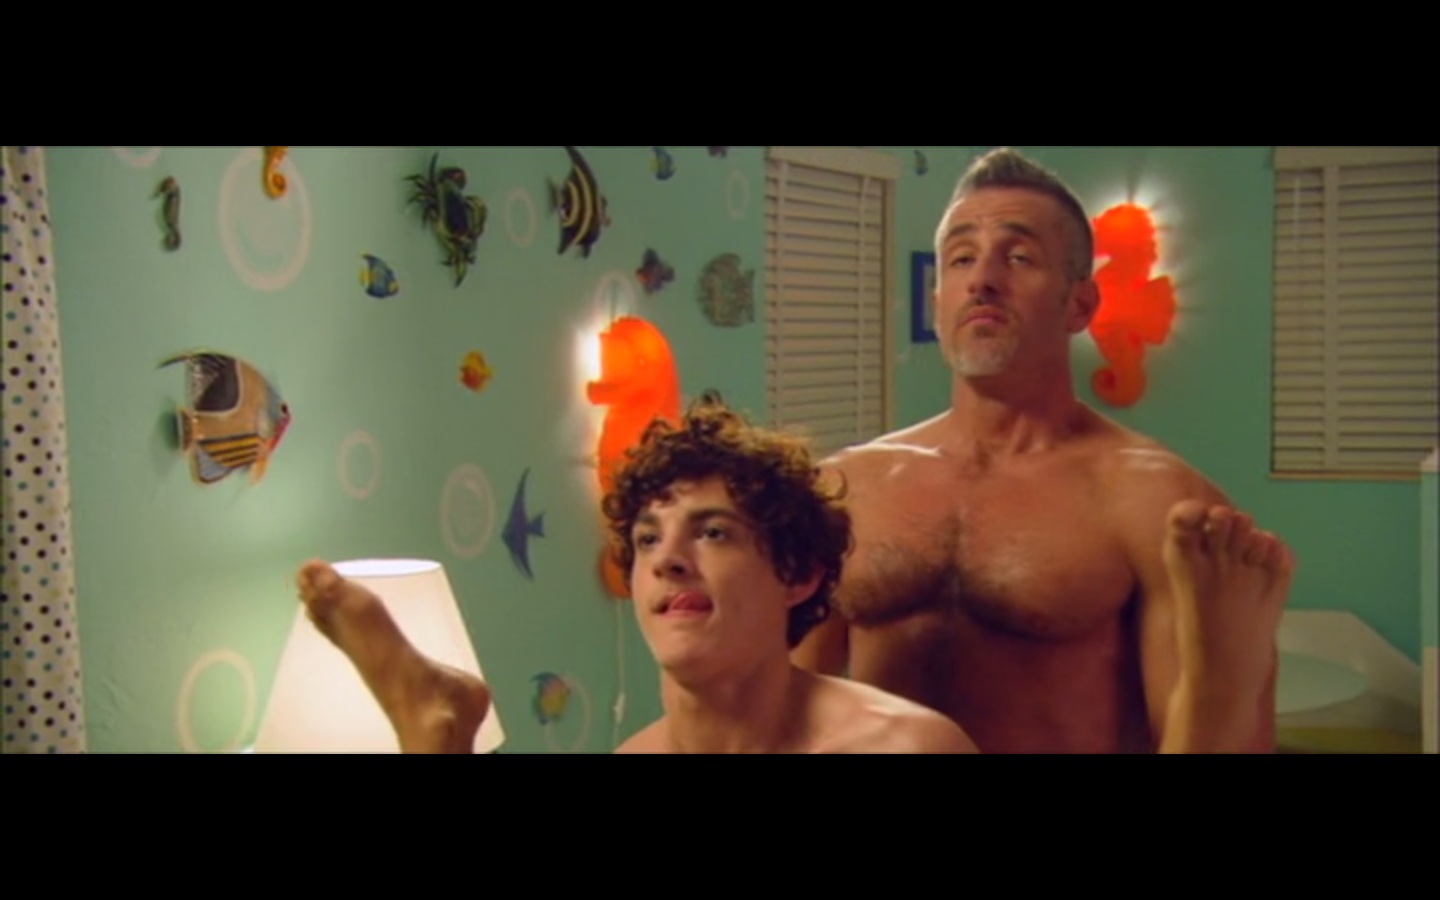 Another Gay Sequel: Gays Gone Wild - Aaron Michael Davies, Jimmy Clabots, C...